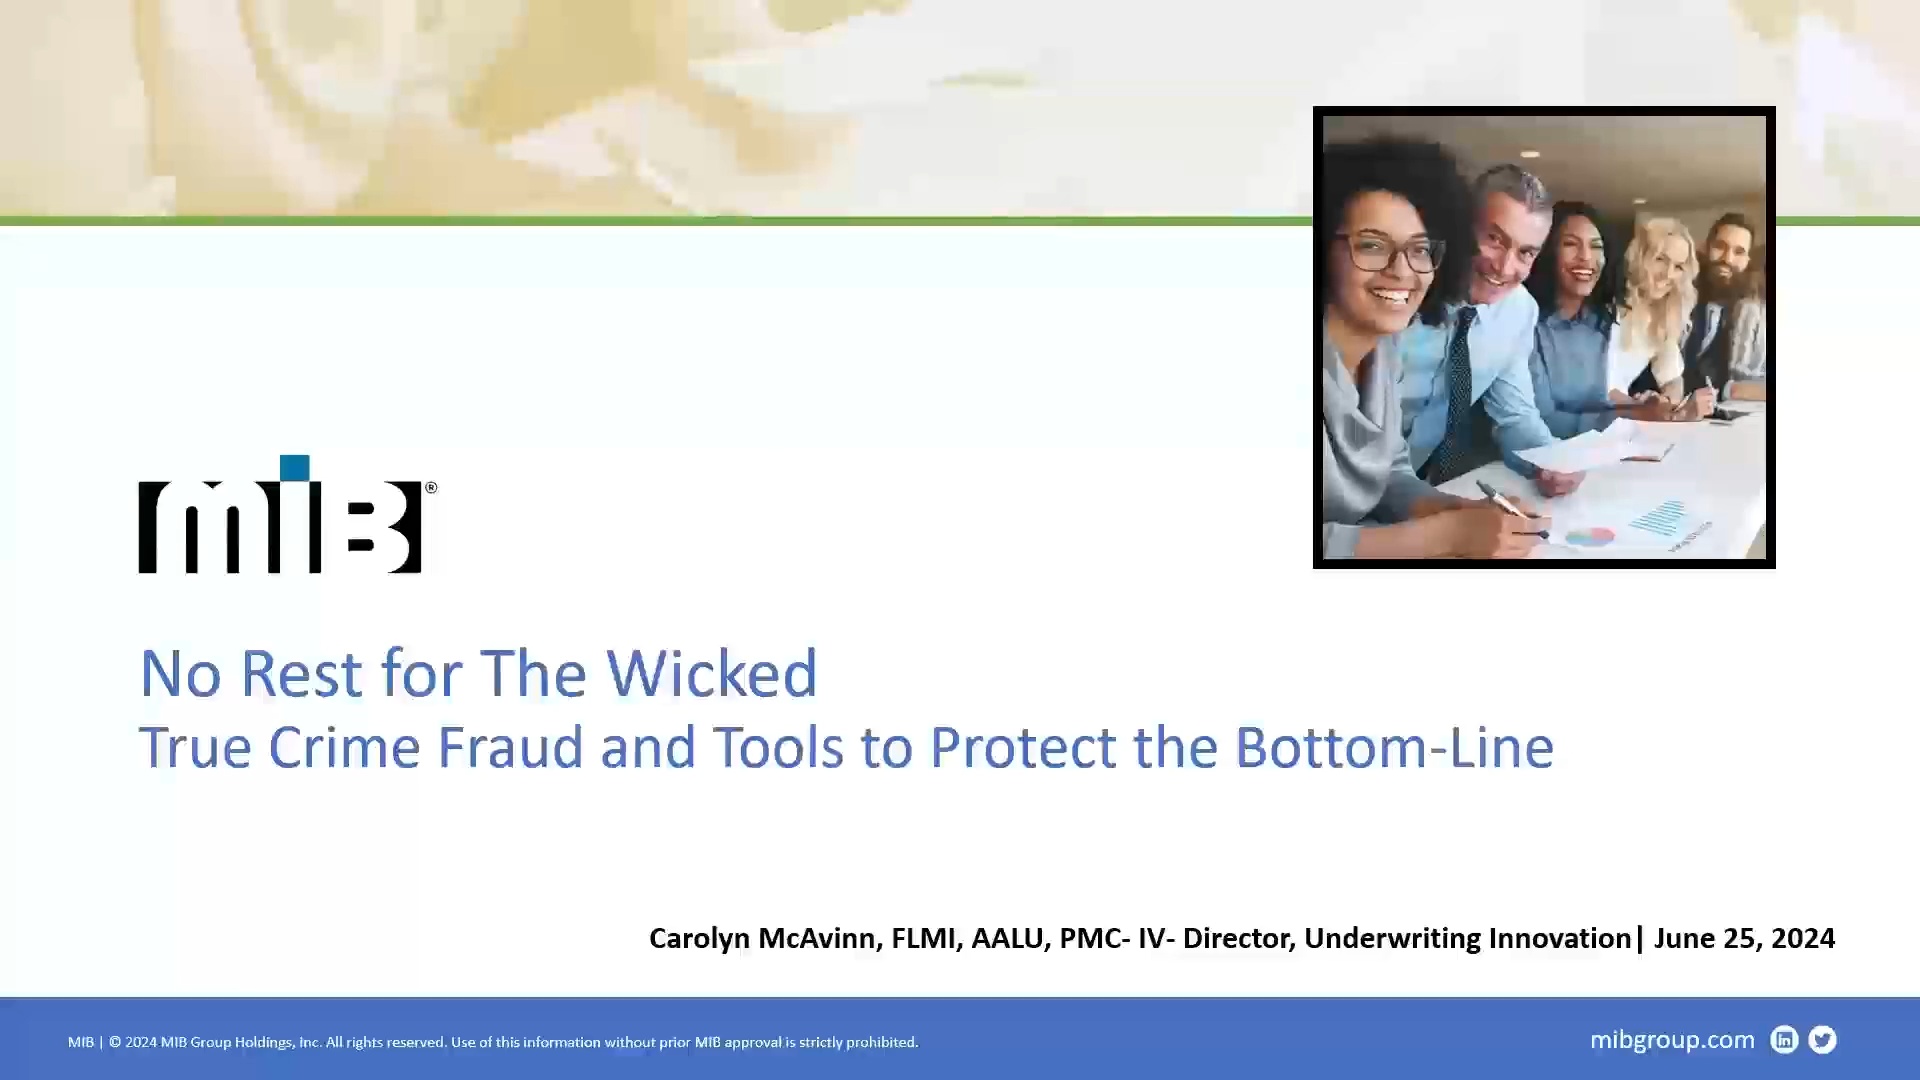 Webinar - No Rest for The Wicked - True Crime Fraud and Tools to Protect the Bottom-Line